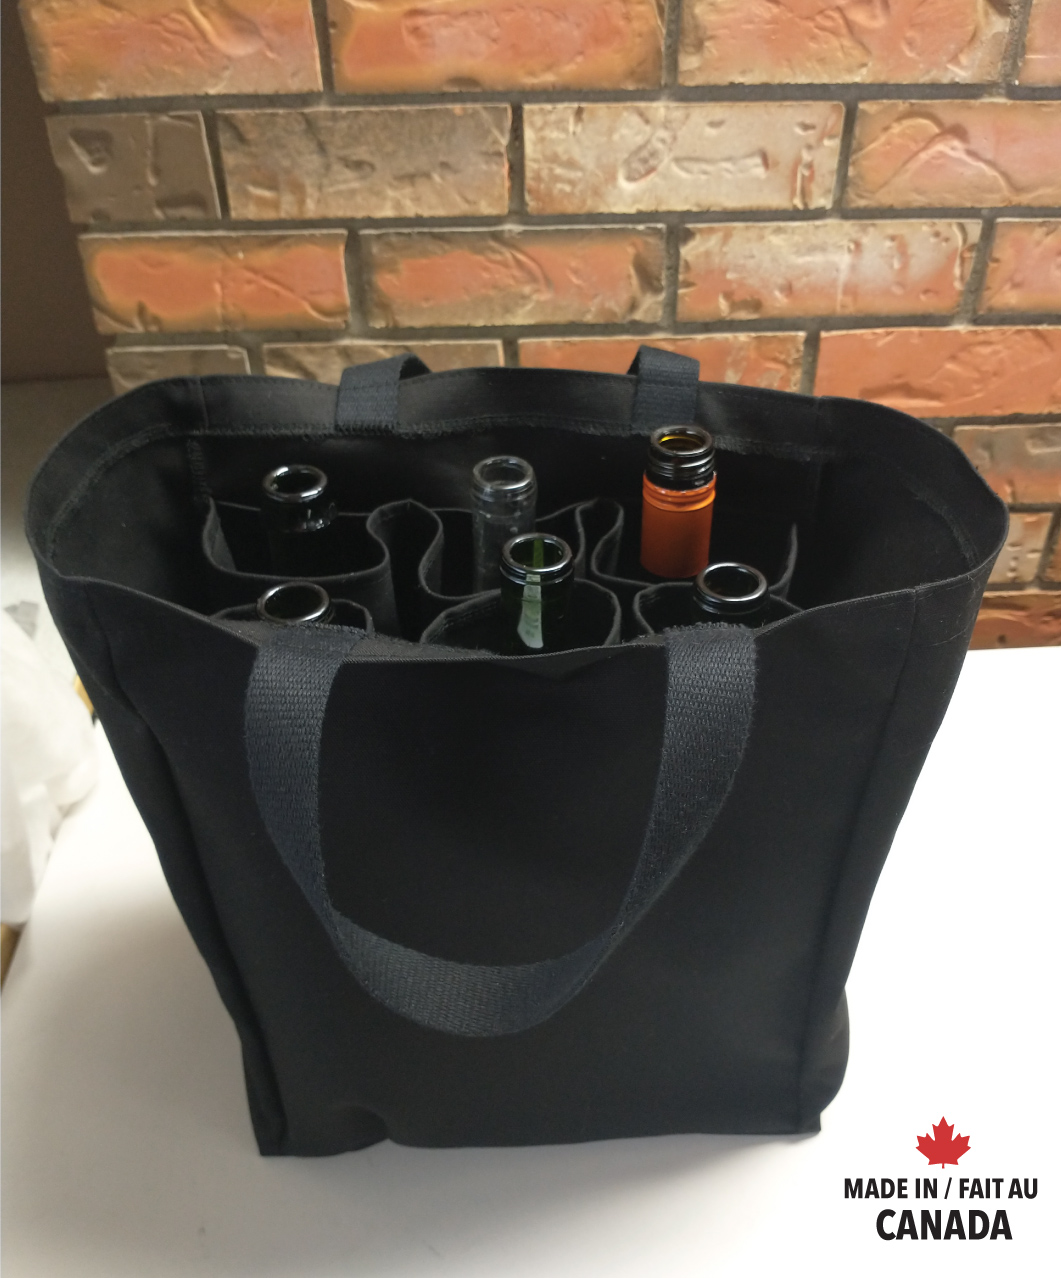 Made in Canada Cotton 6 bottle wine tote / grocery bag